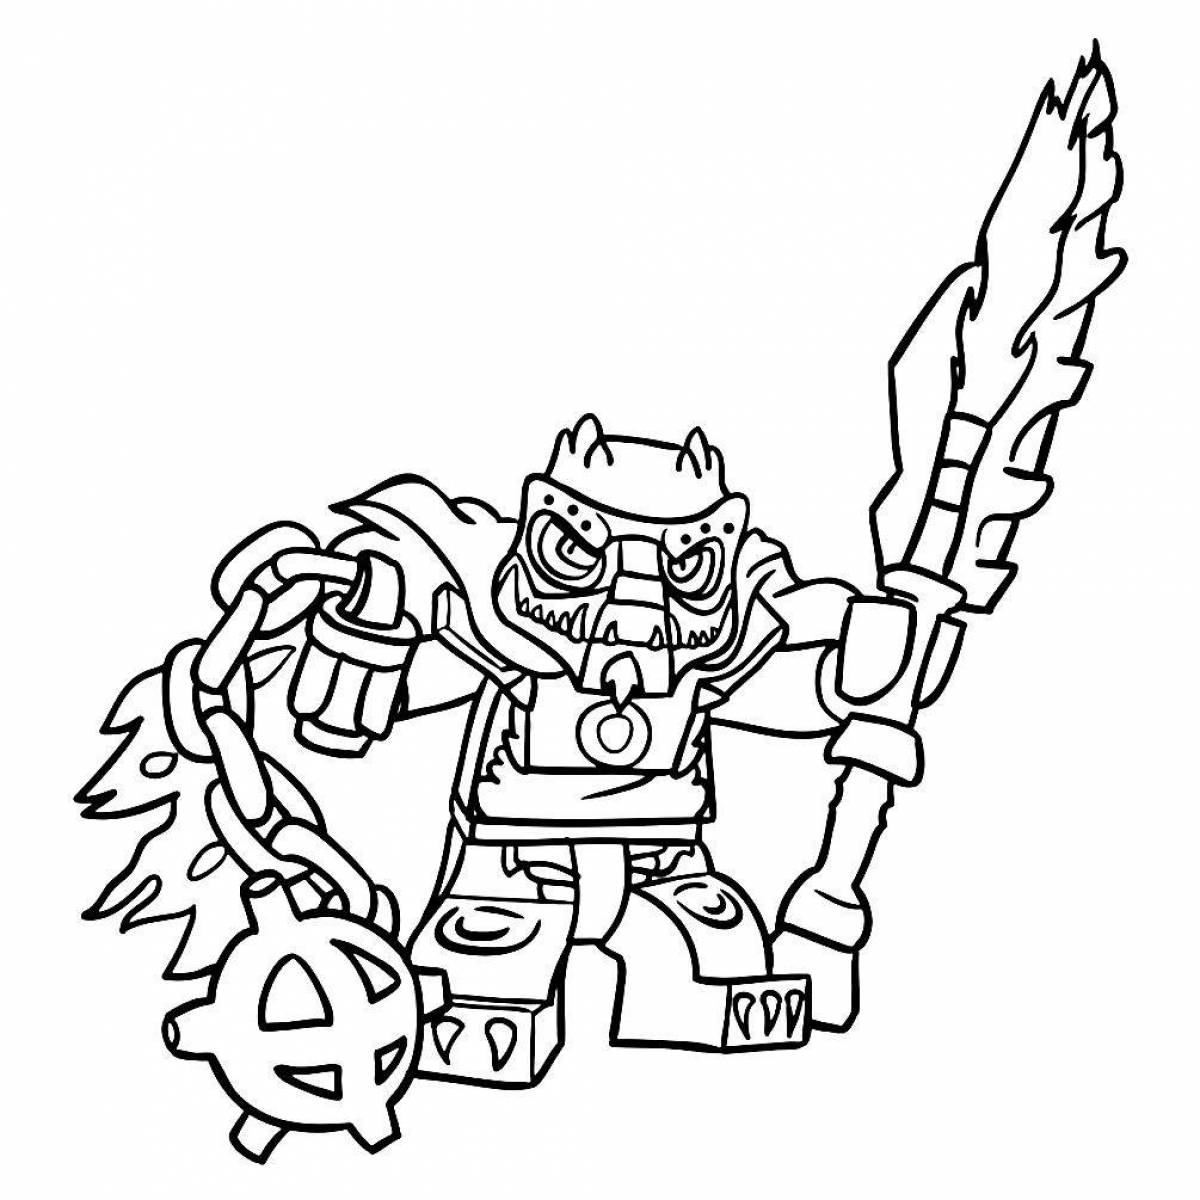 Intriguing lego chima coloring book